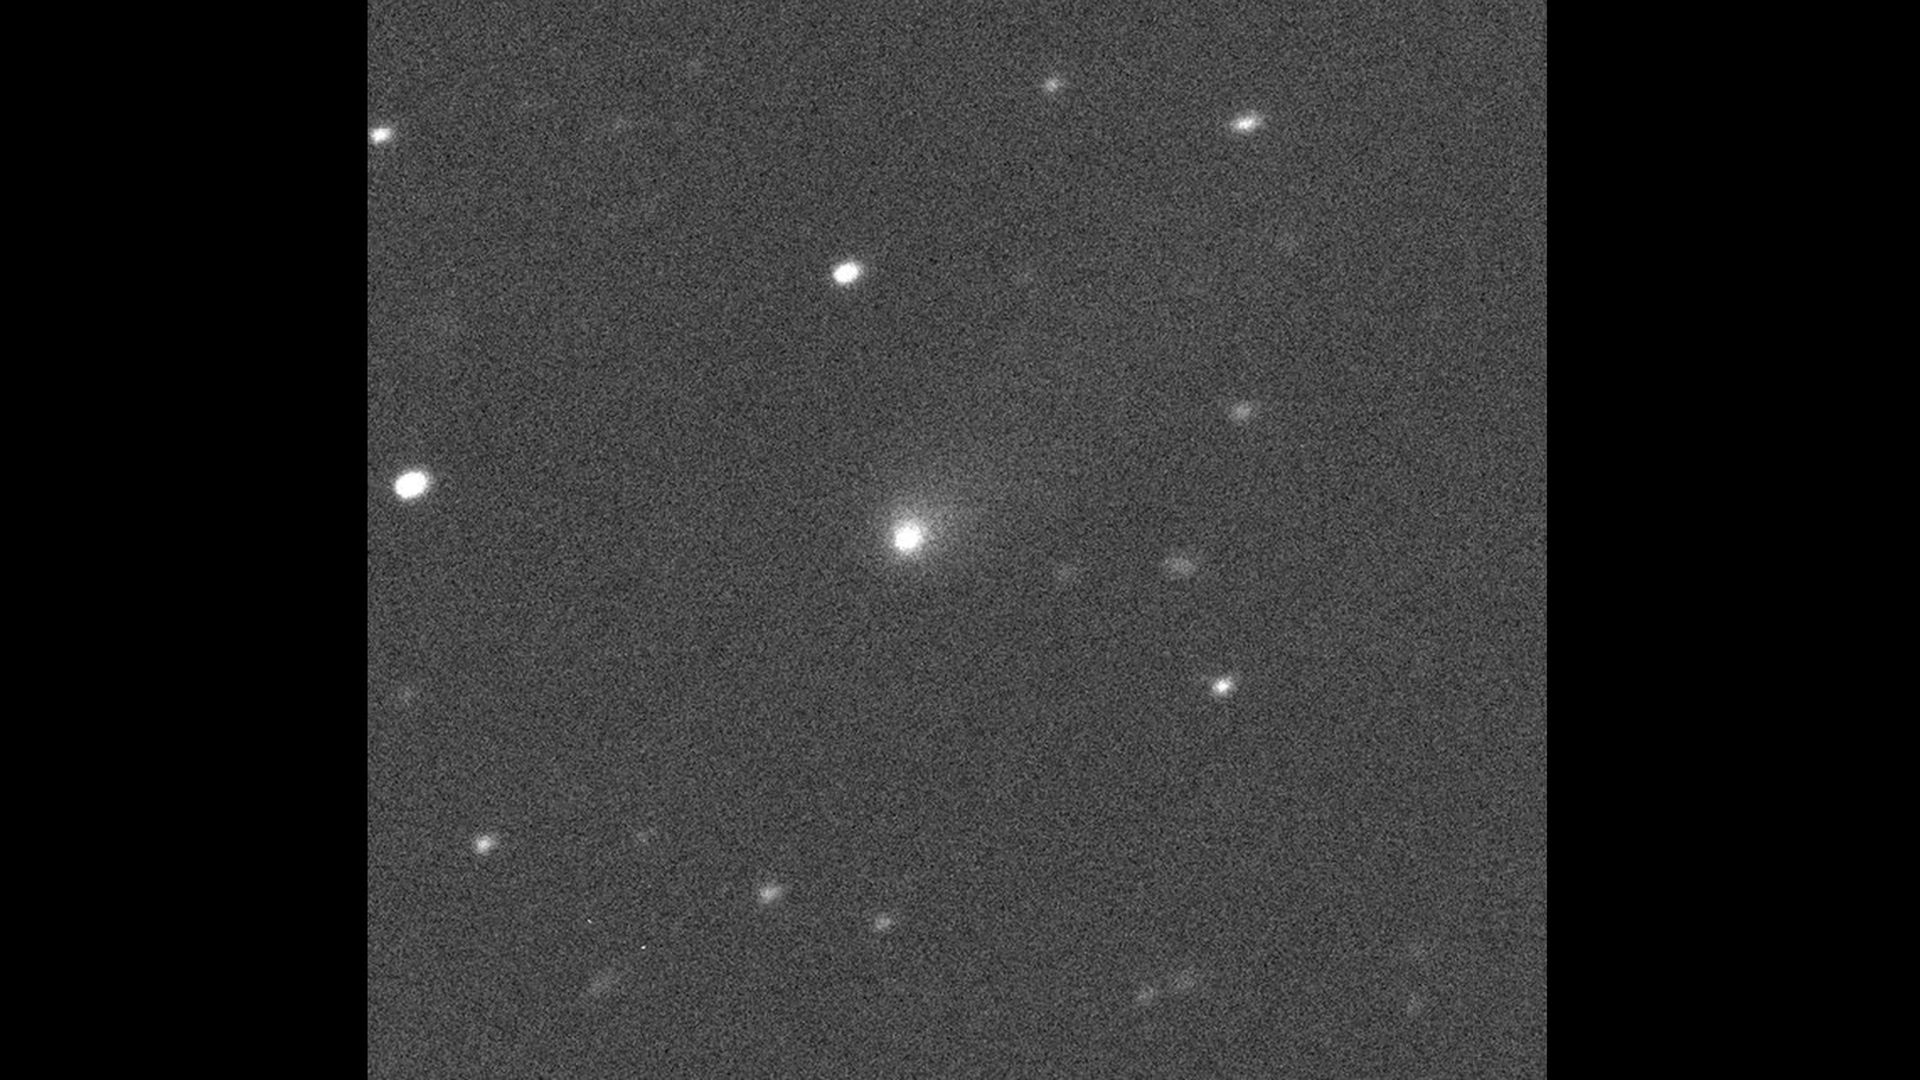 A fuzzy view of a comet in deep space